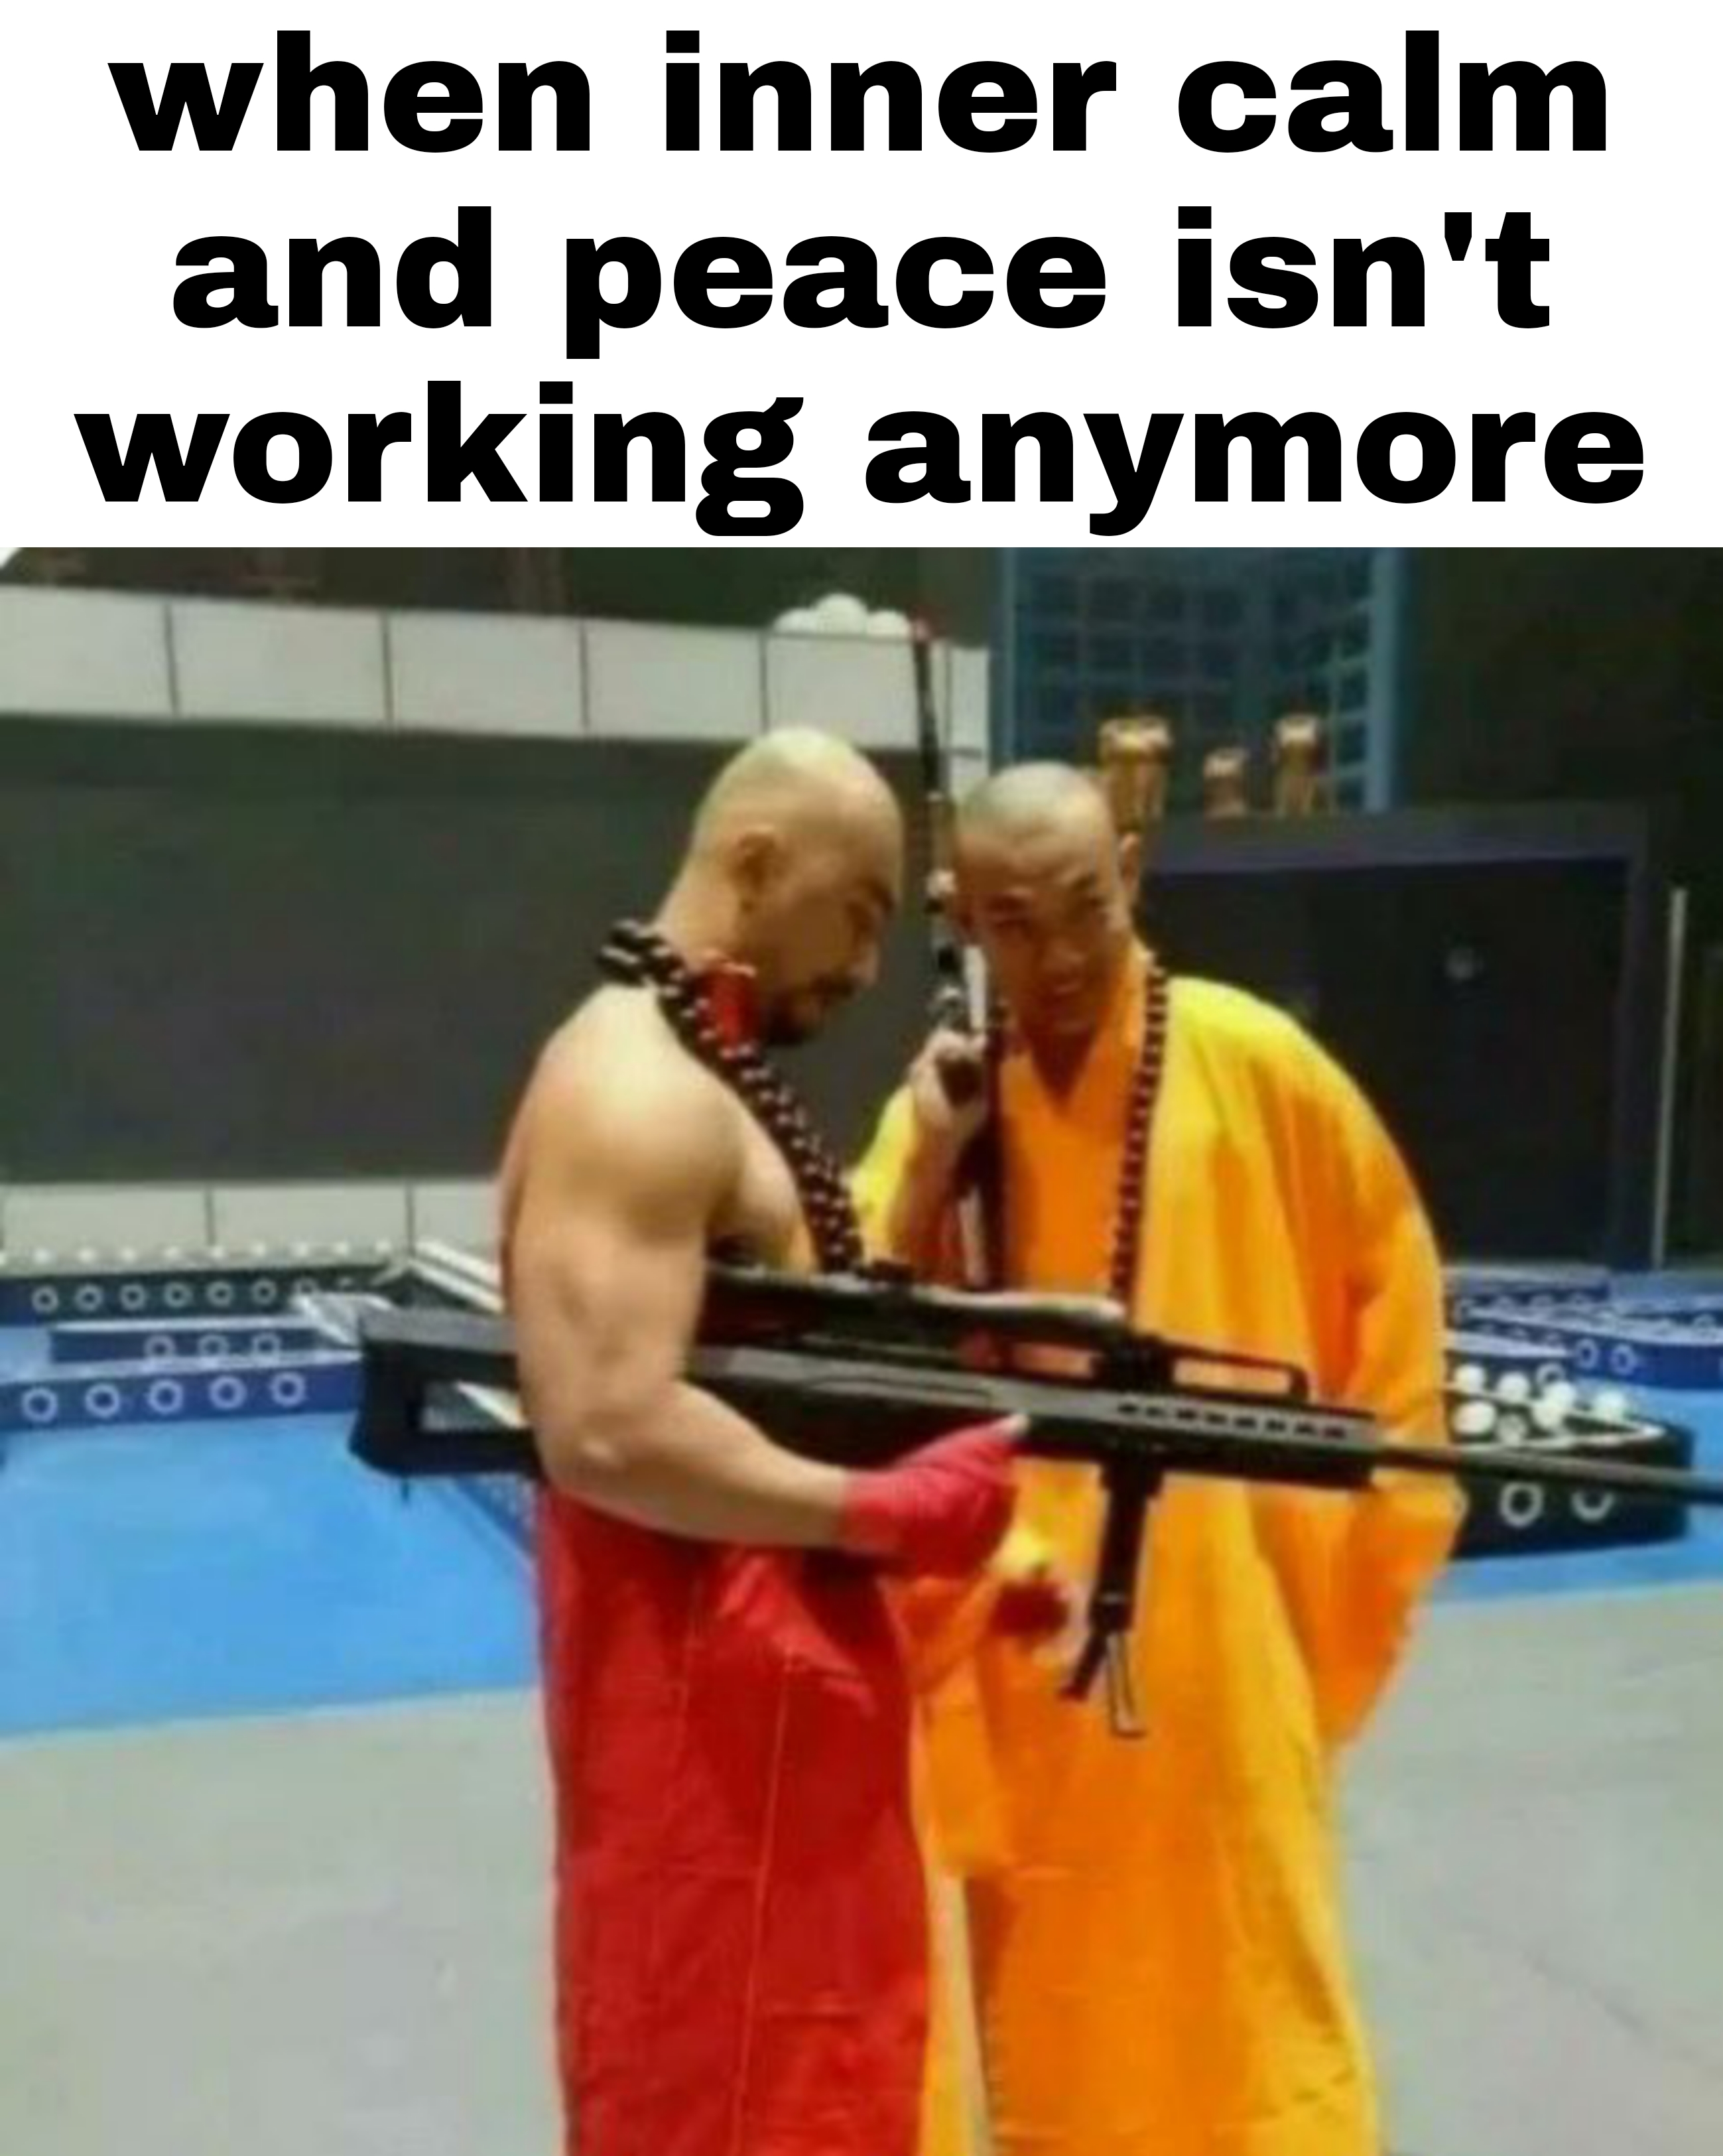 funny memes and pics  - shoulder - when inner calm and peace isn't working anymore 00